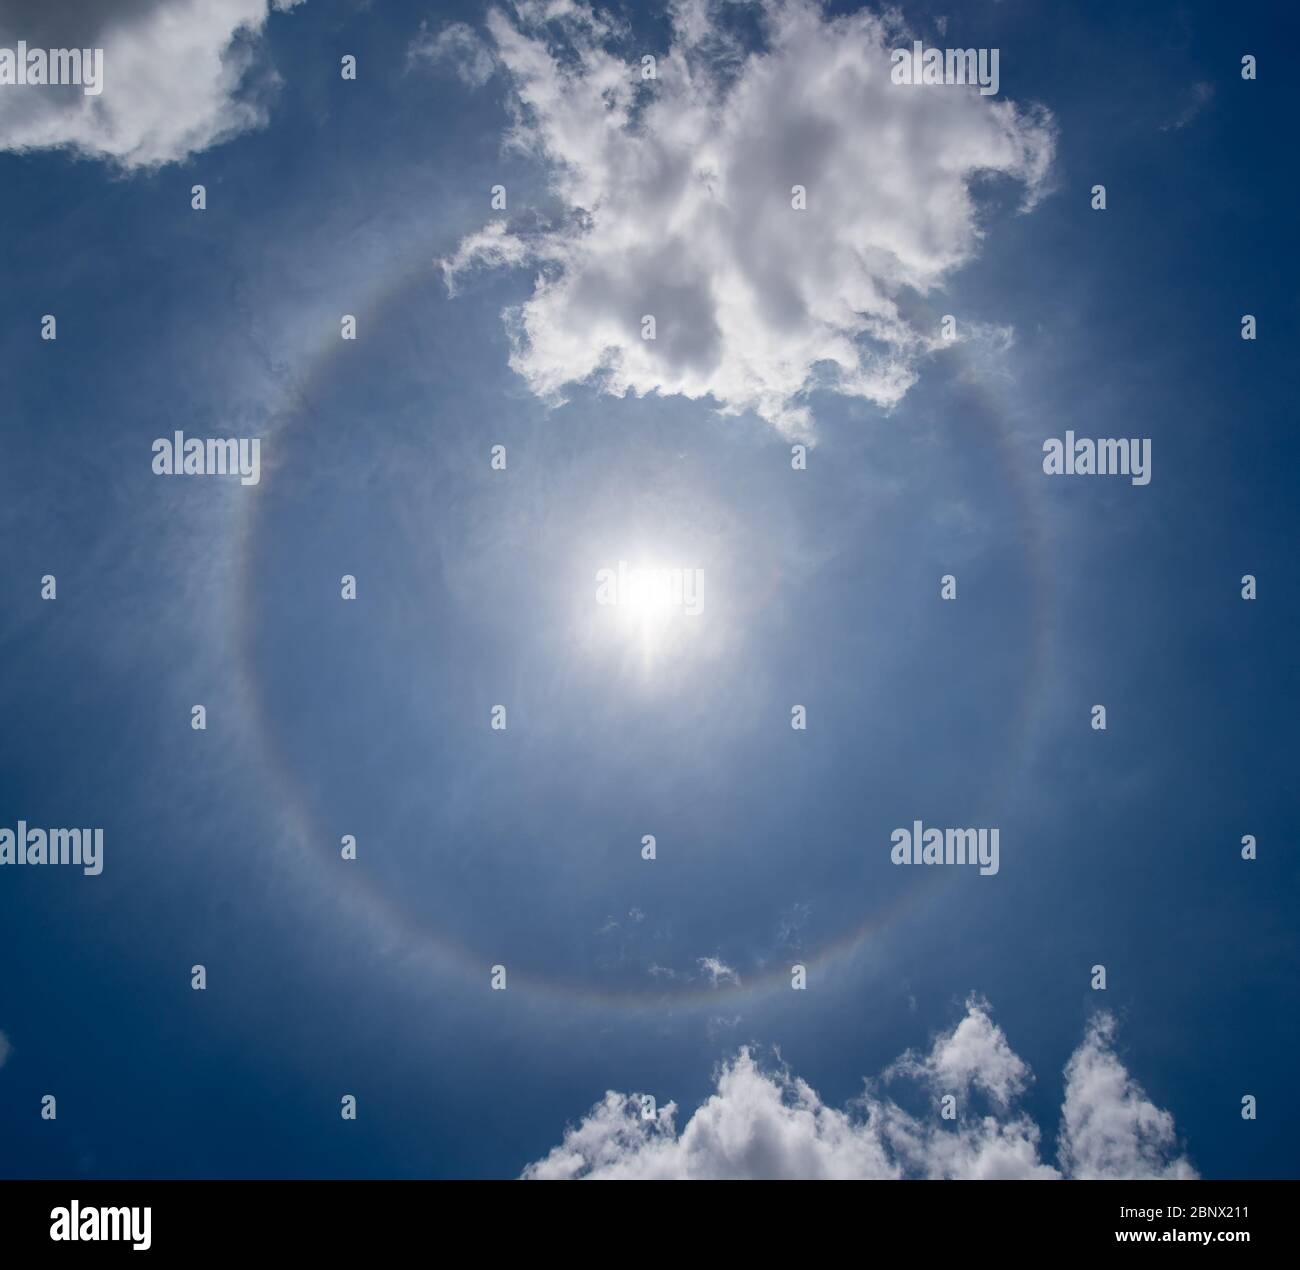 Photo of a solar halo visible in the sky. A color circle with the sun in the center and some cirrus clouds around it Stock Photo